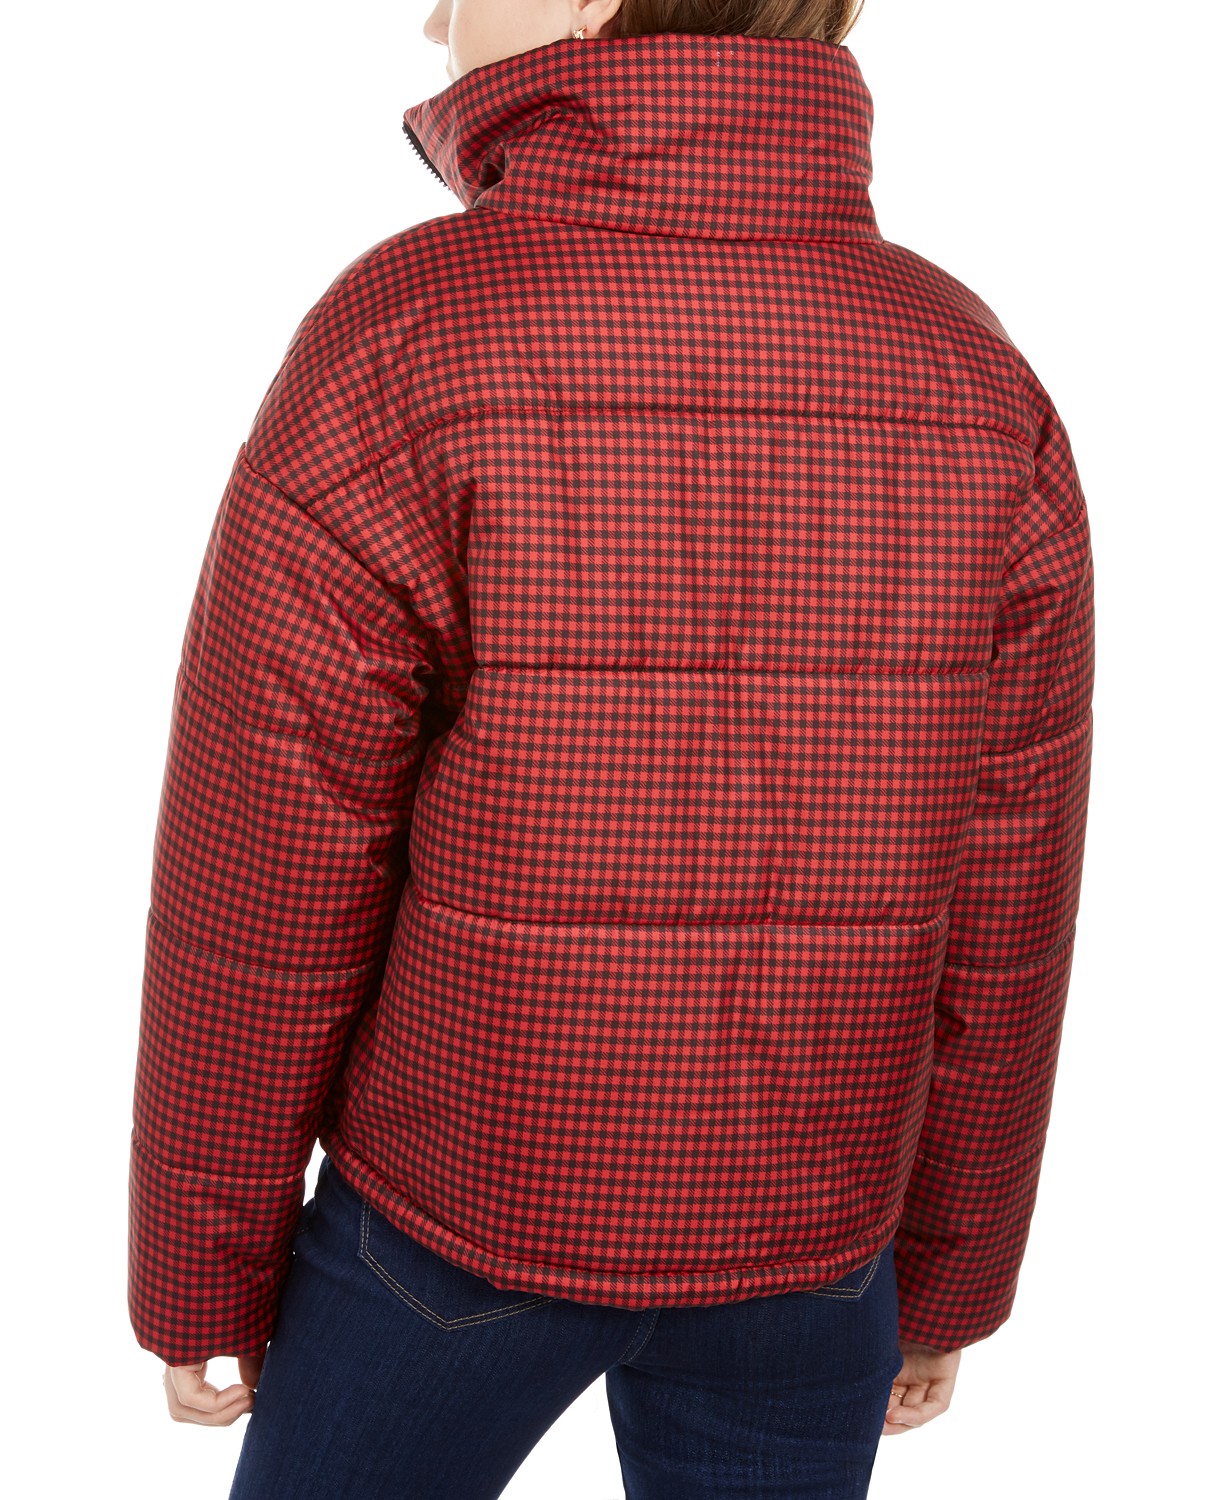 woocommerce-673321-2209615.cloudwaysapps.com-celebrity-pink-womens-red-plaid-puffer-coat-jacket